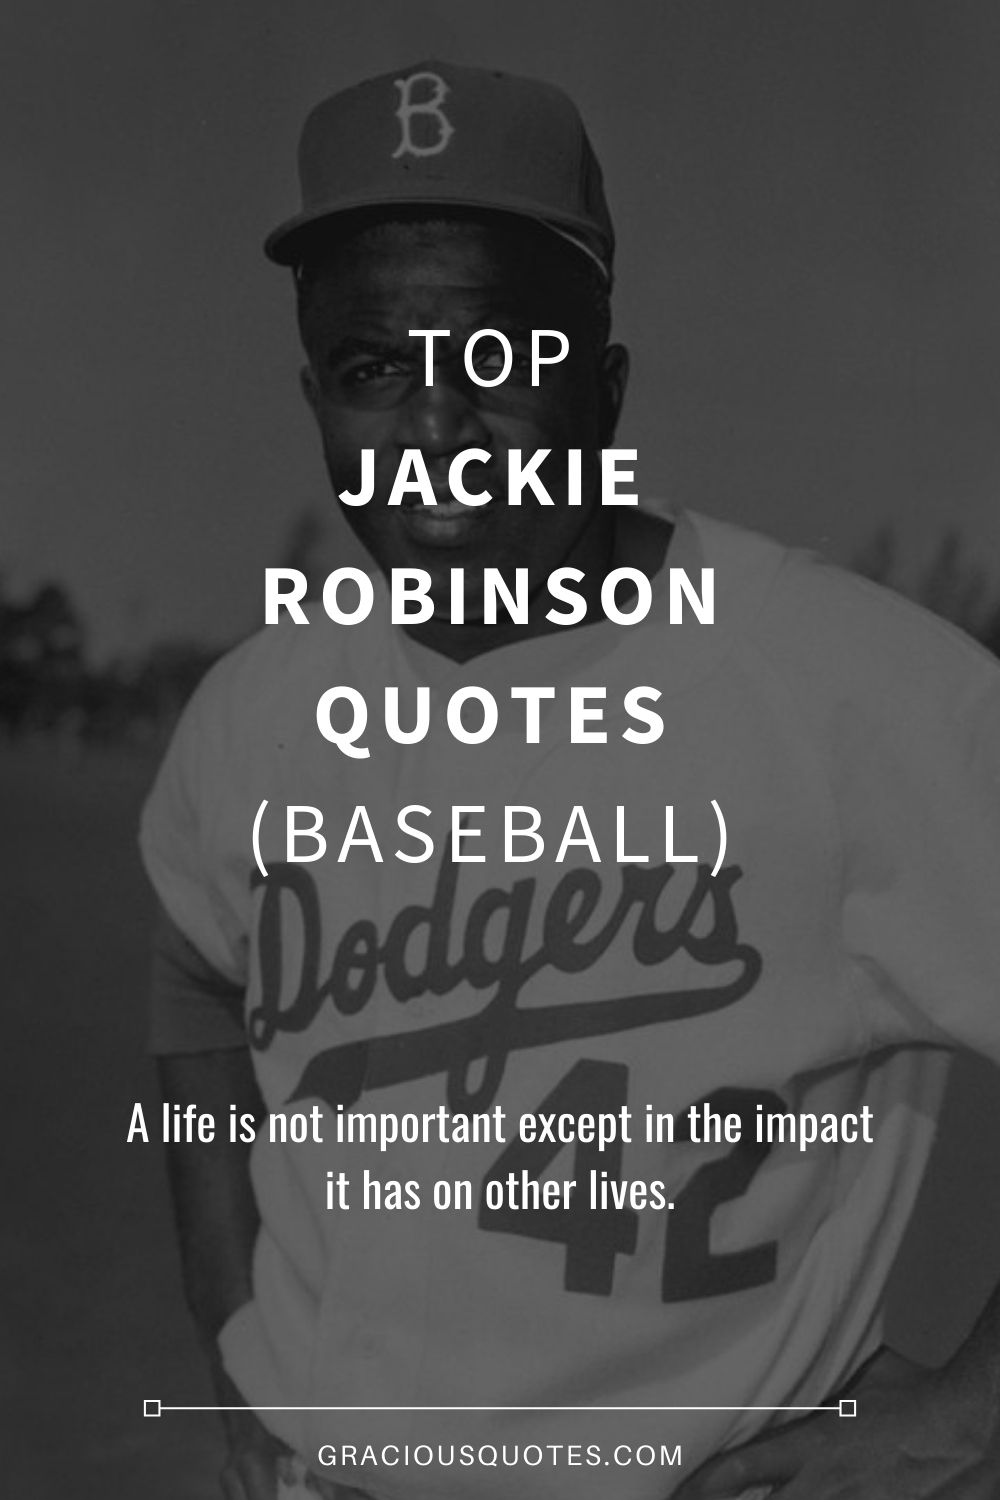 Top 10 Jackie Robinson Quotes - Gracious Quotes 